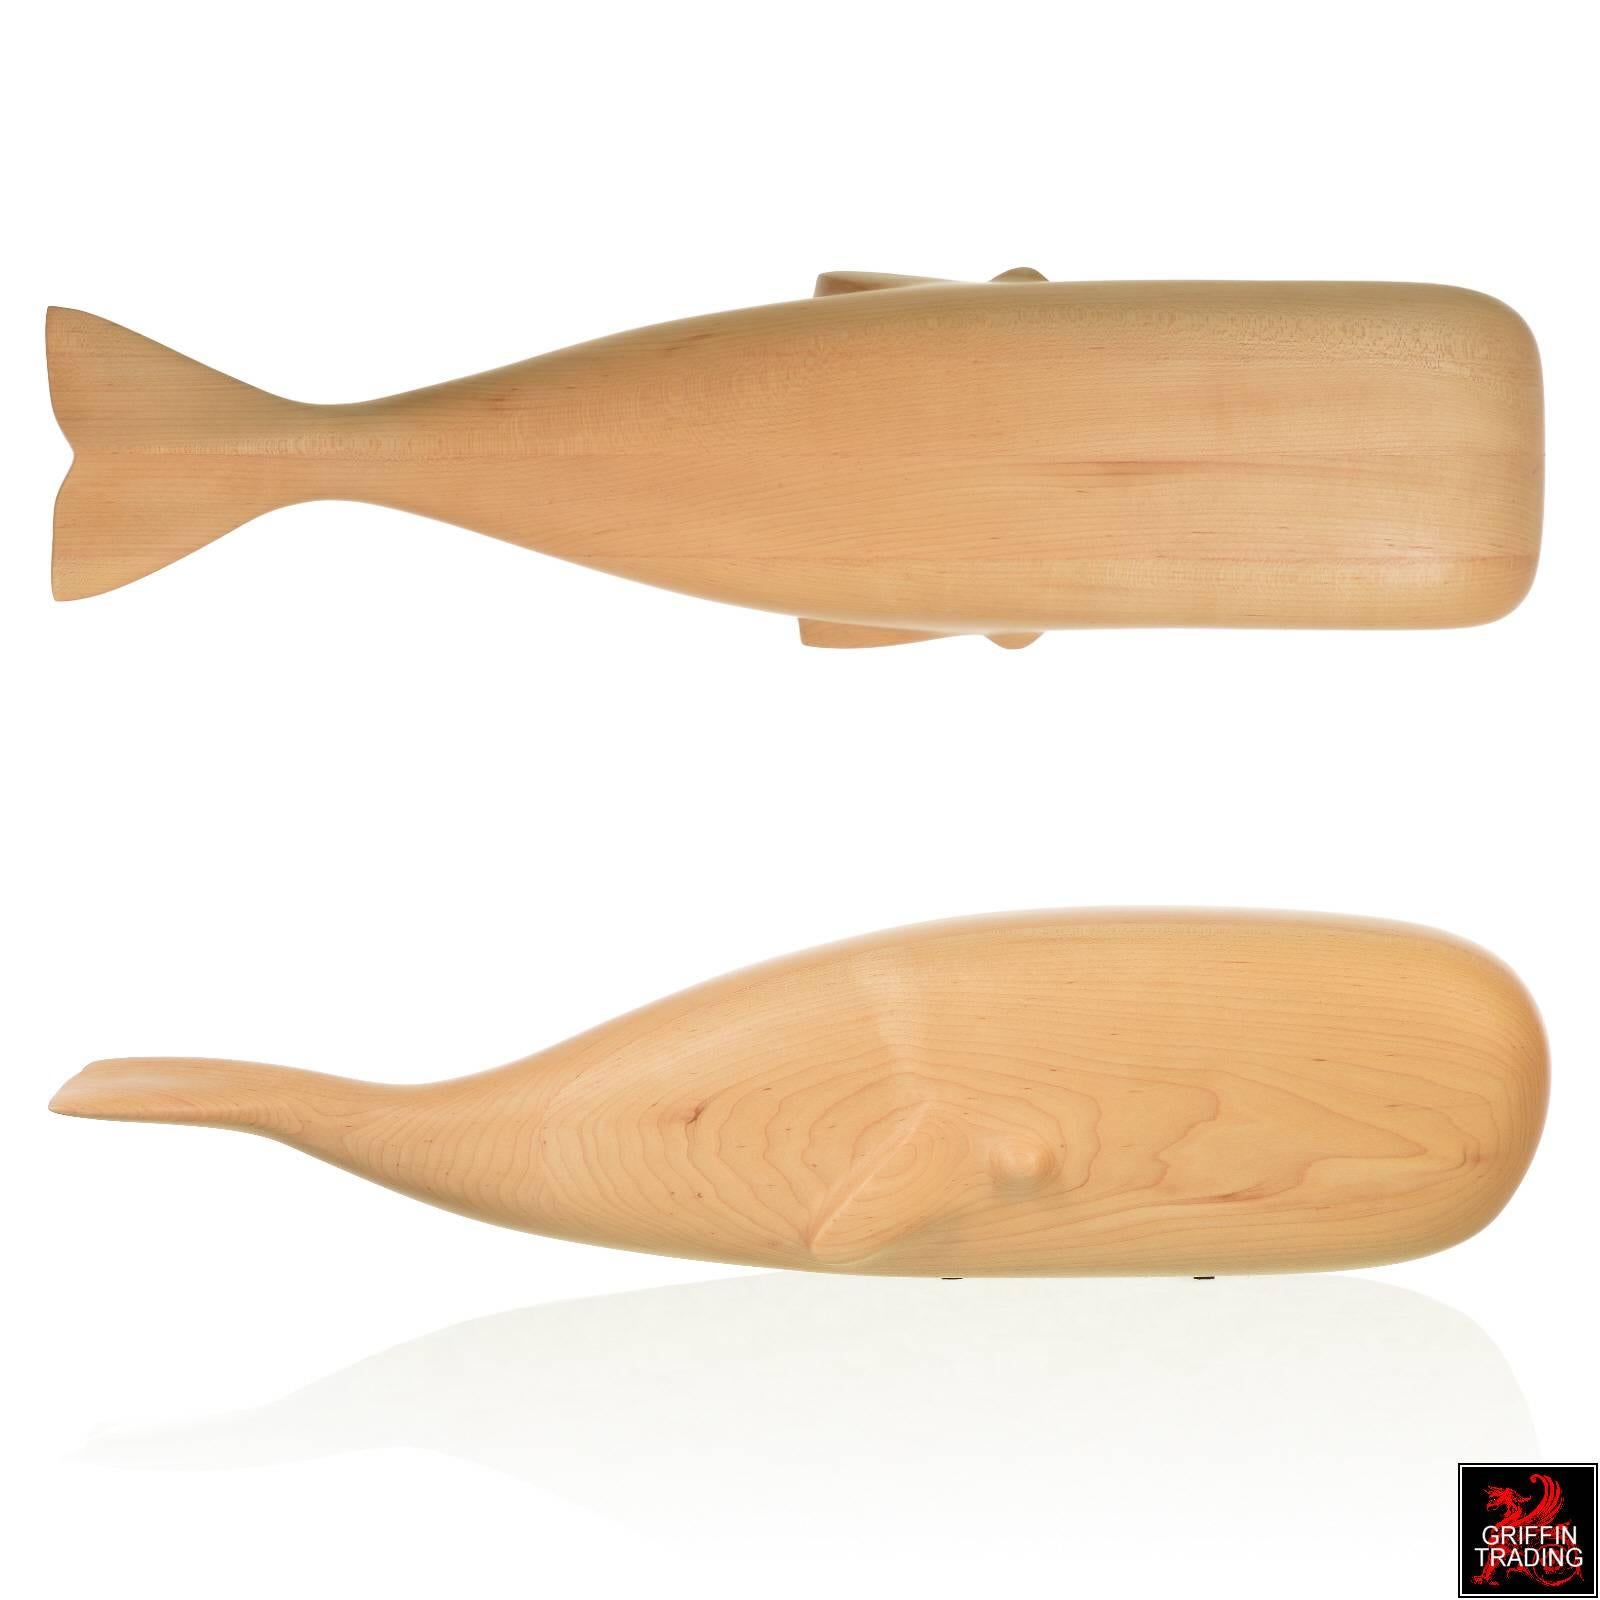 American White Whale Modern Wood Sculpture DRH15 For Sale